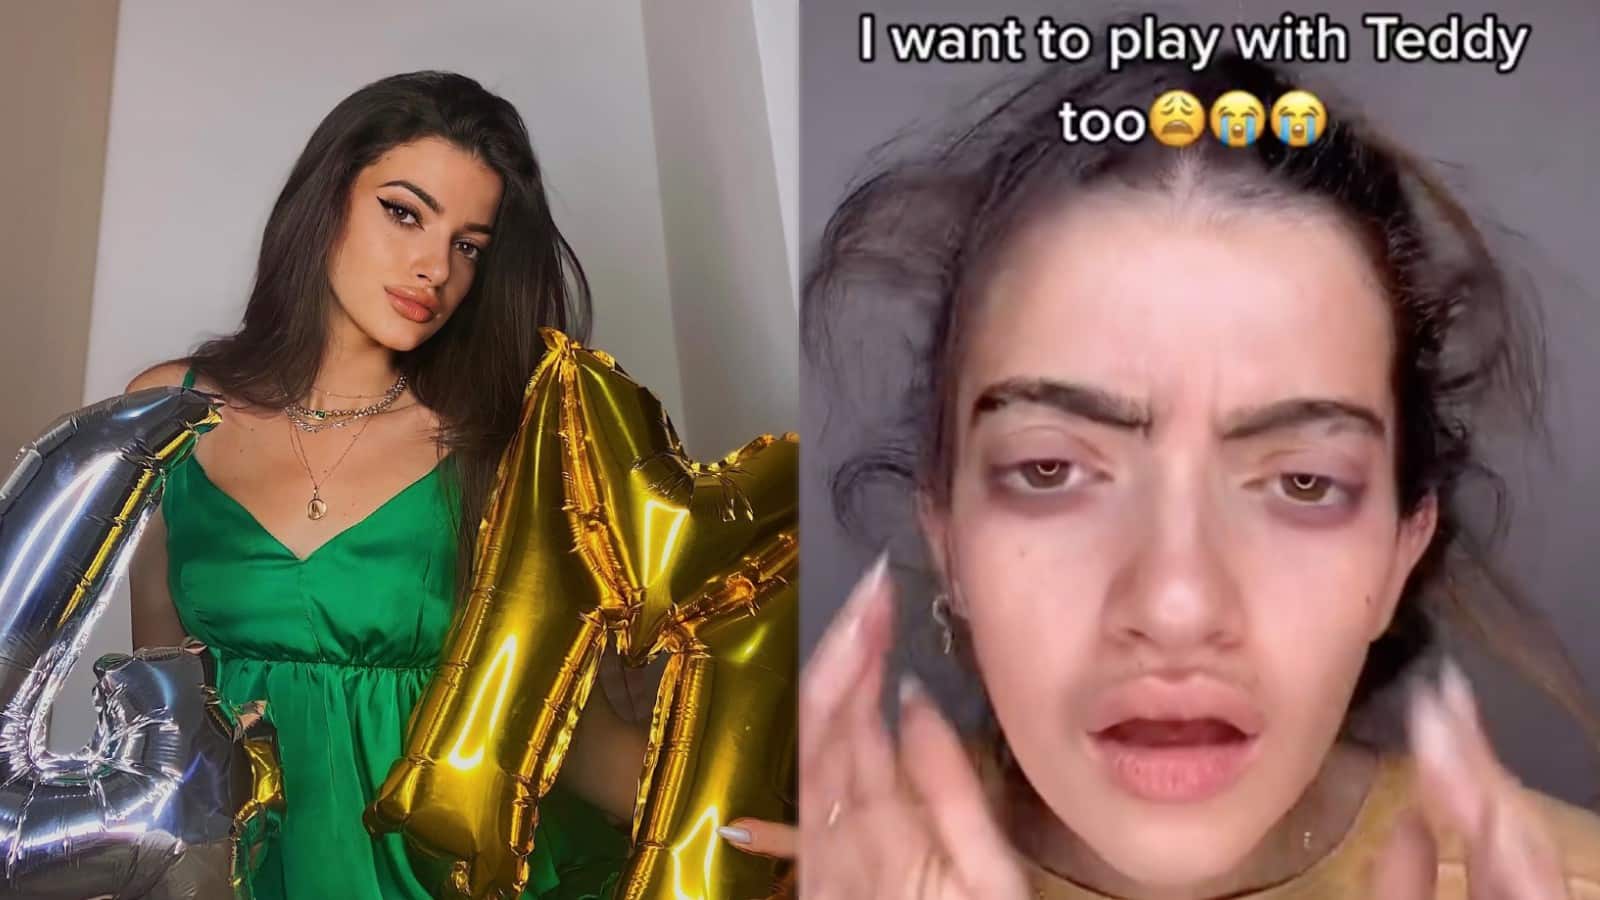 goes viral with make-up transformations